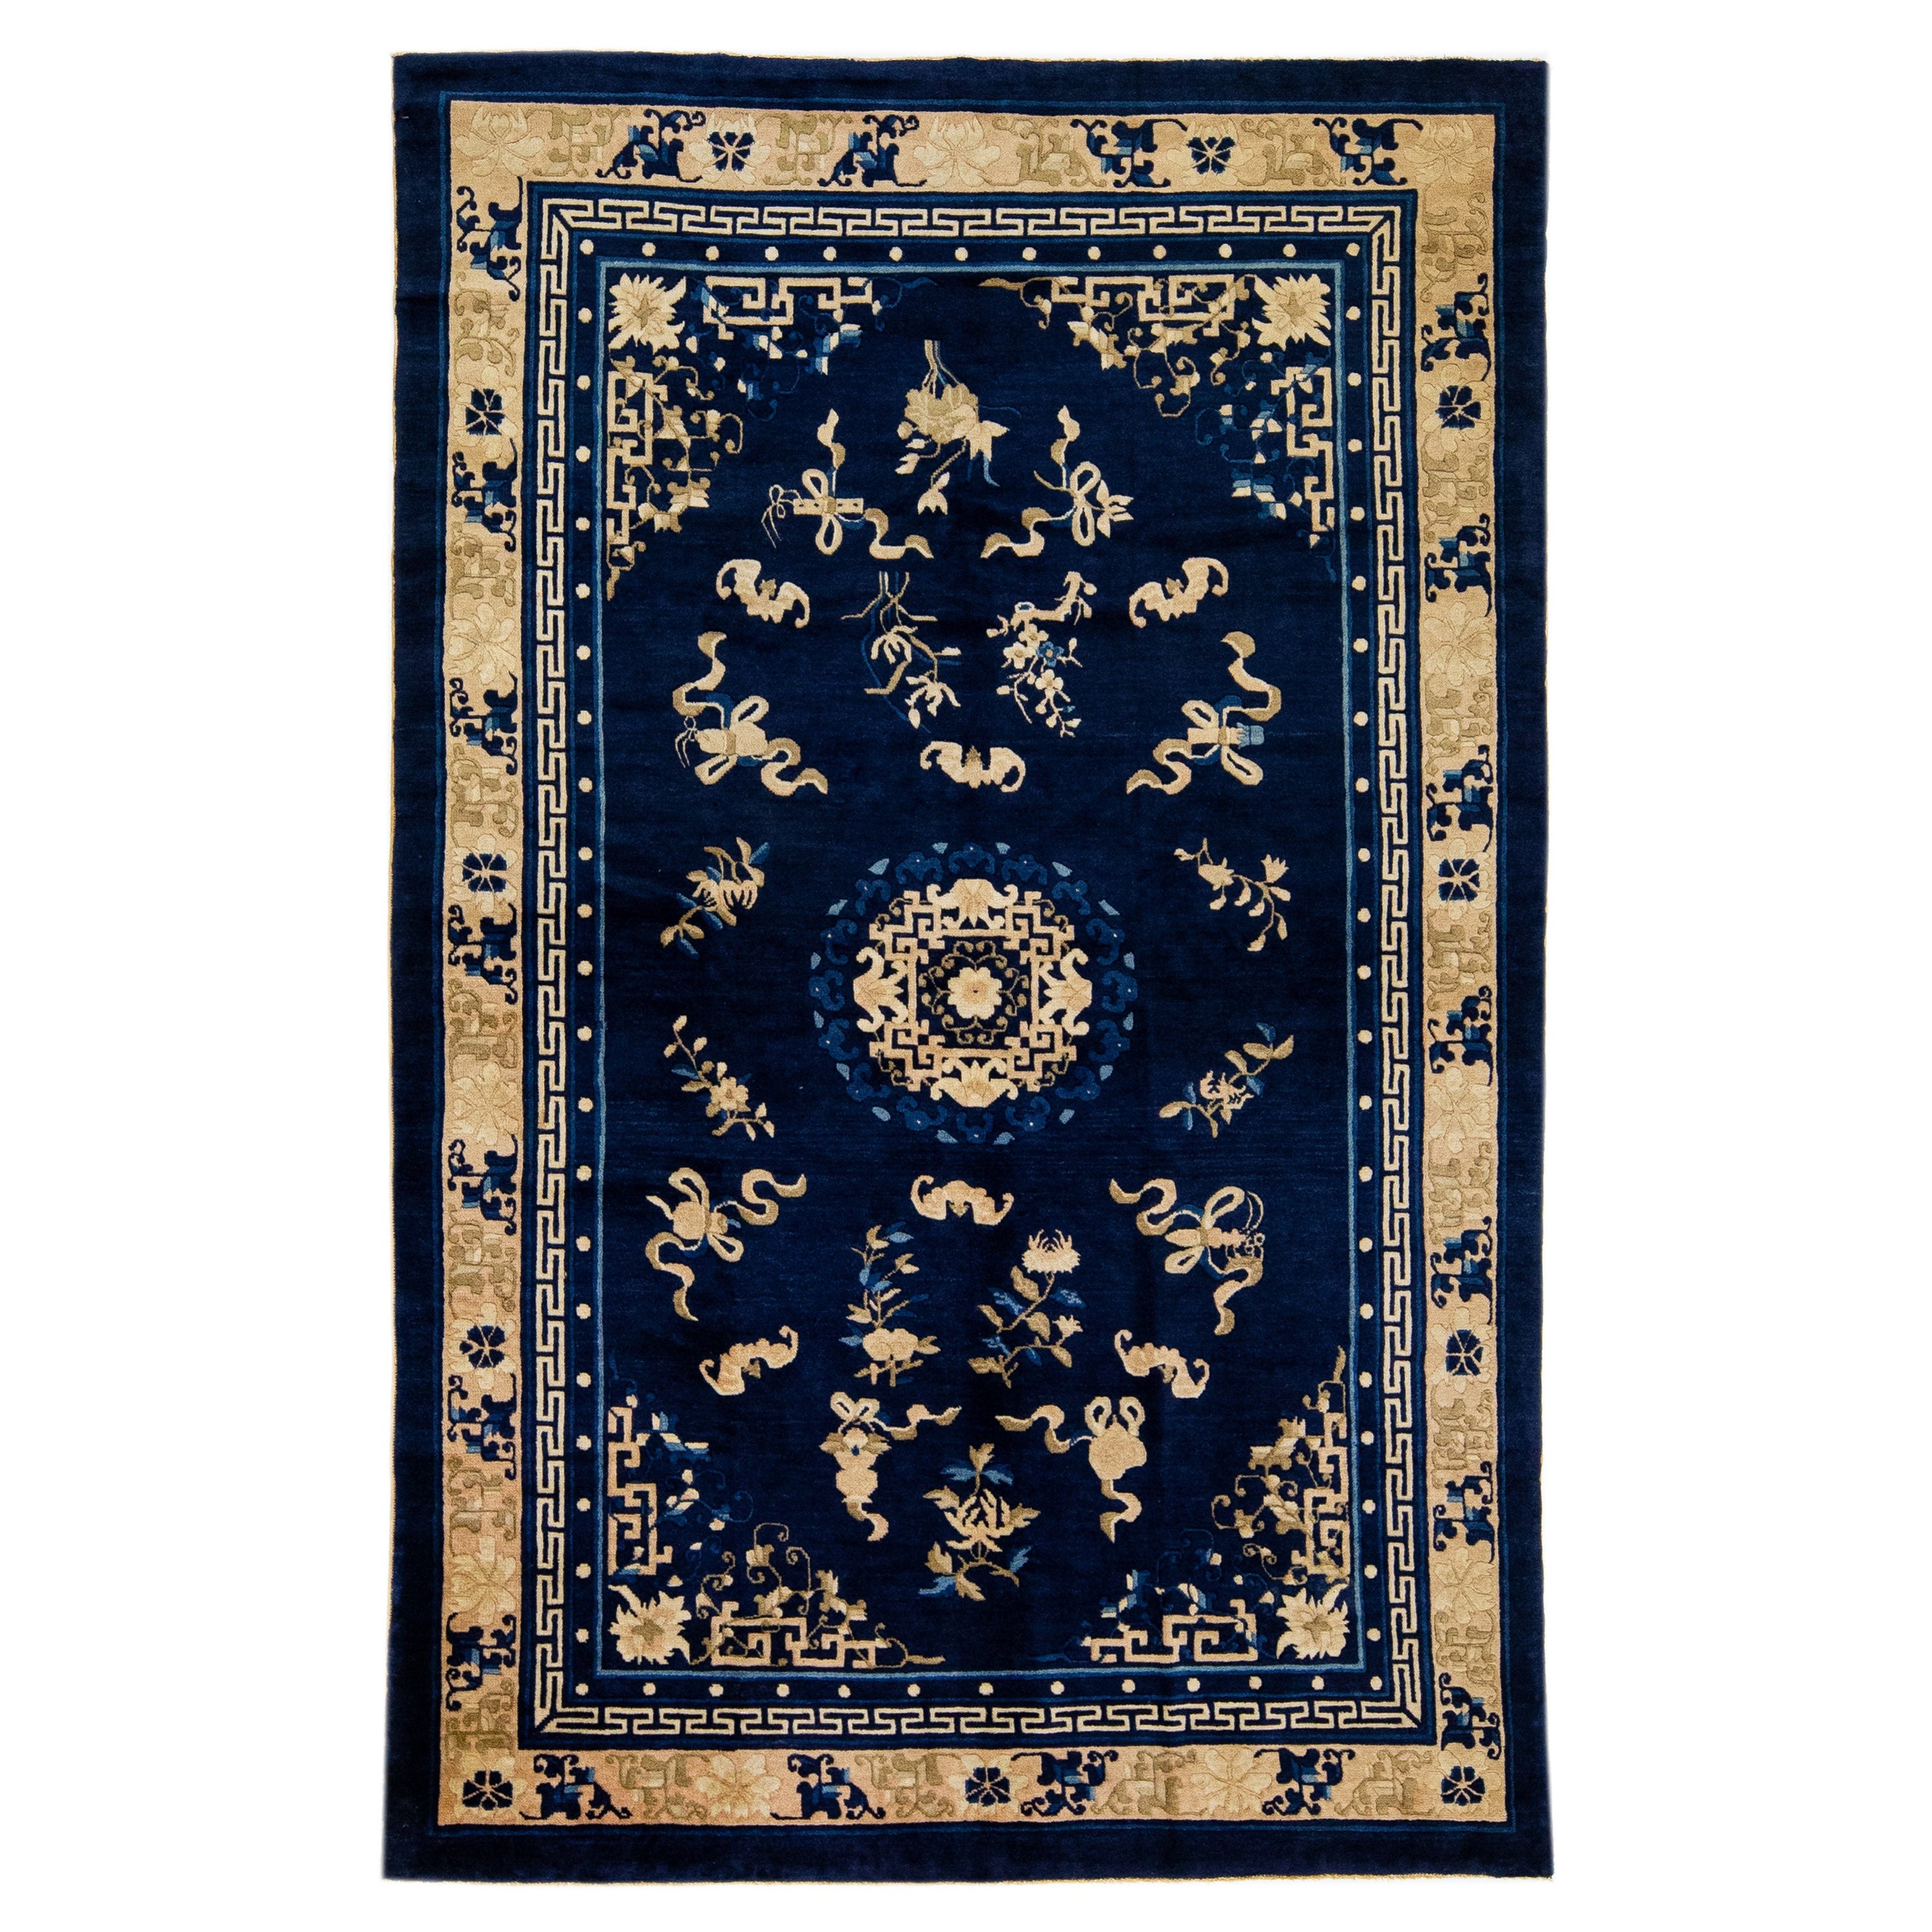 1920s Antique Chinese Peking Wool Rug Handmade Blue with Classic Floral Design For Sale